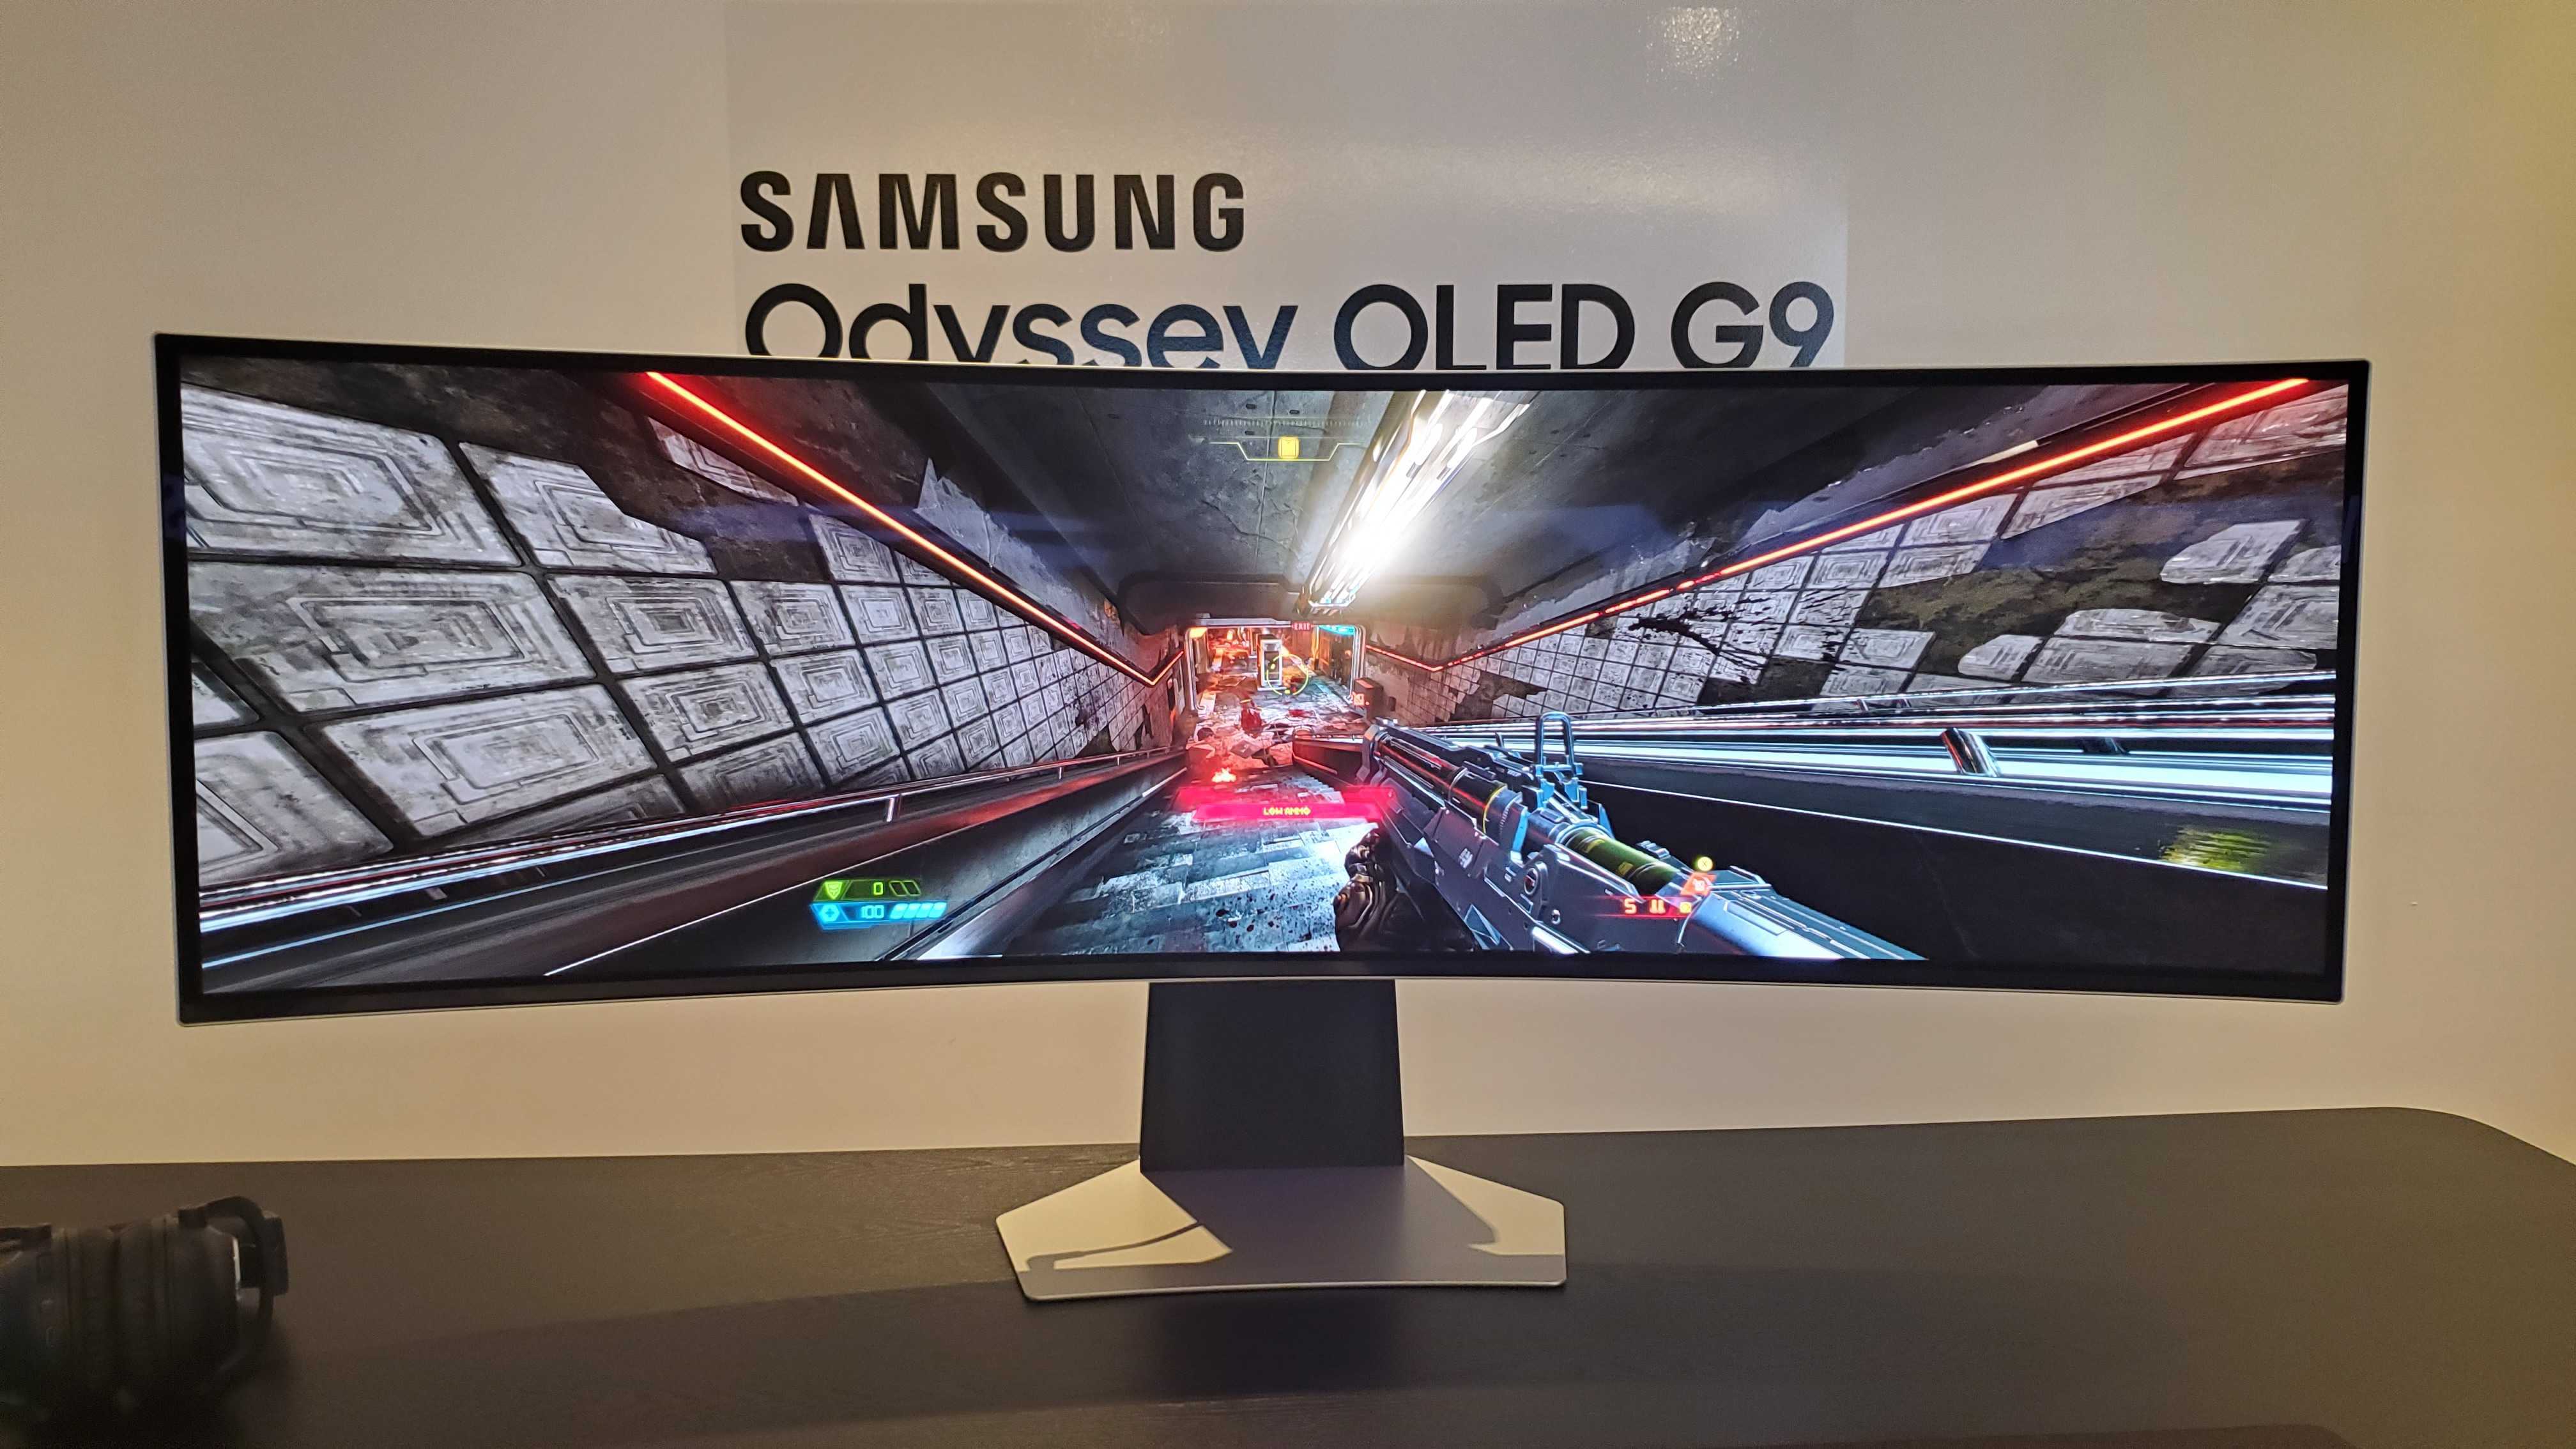 Samsung Odyssey OLED G9 showcased at a Samsung event